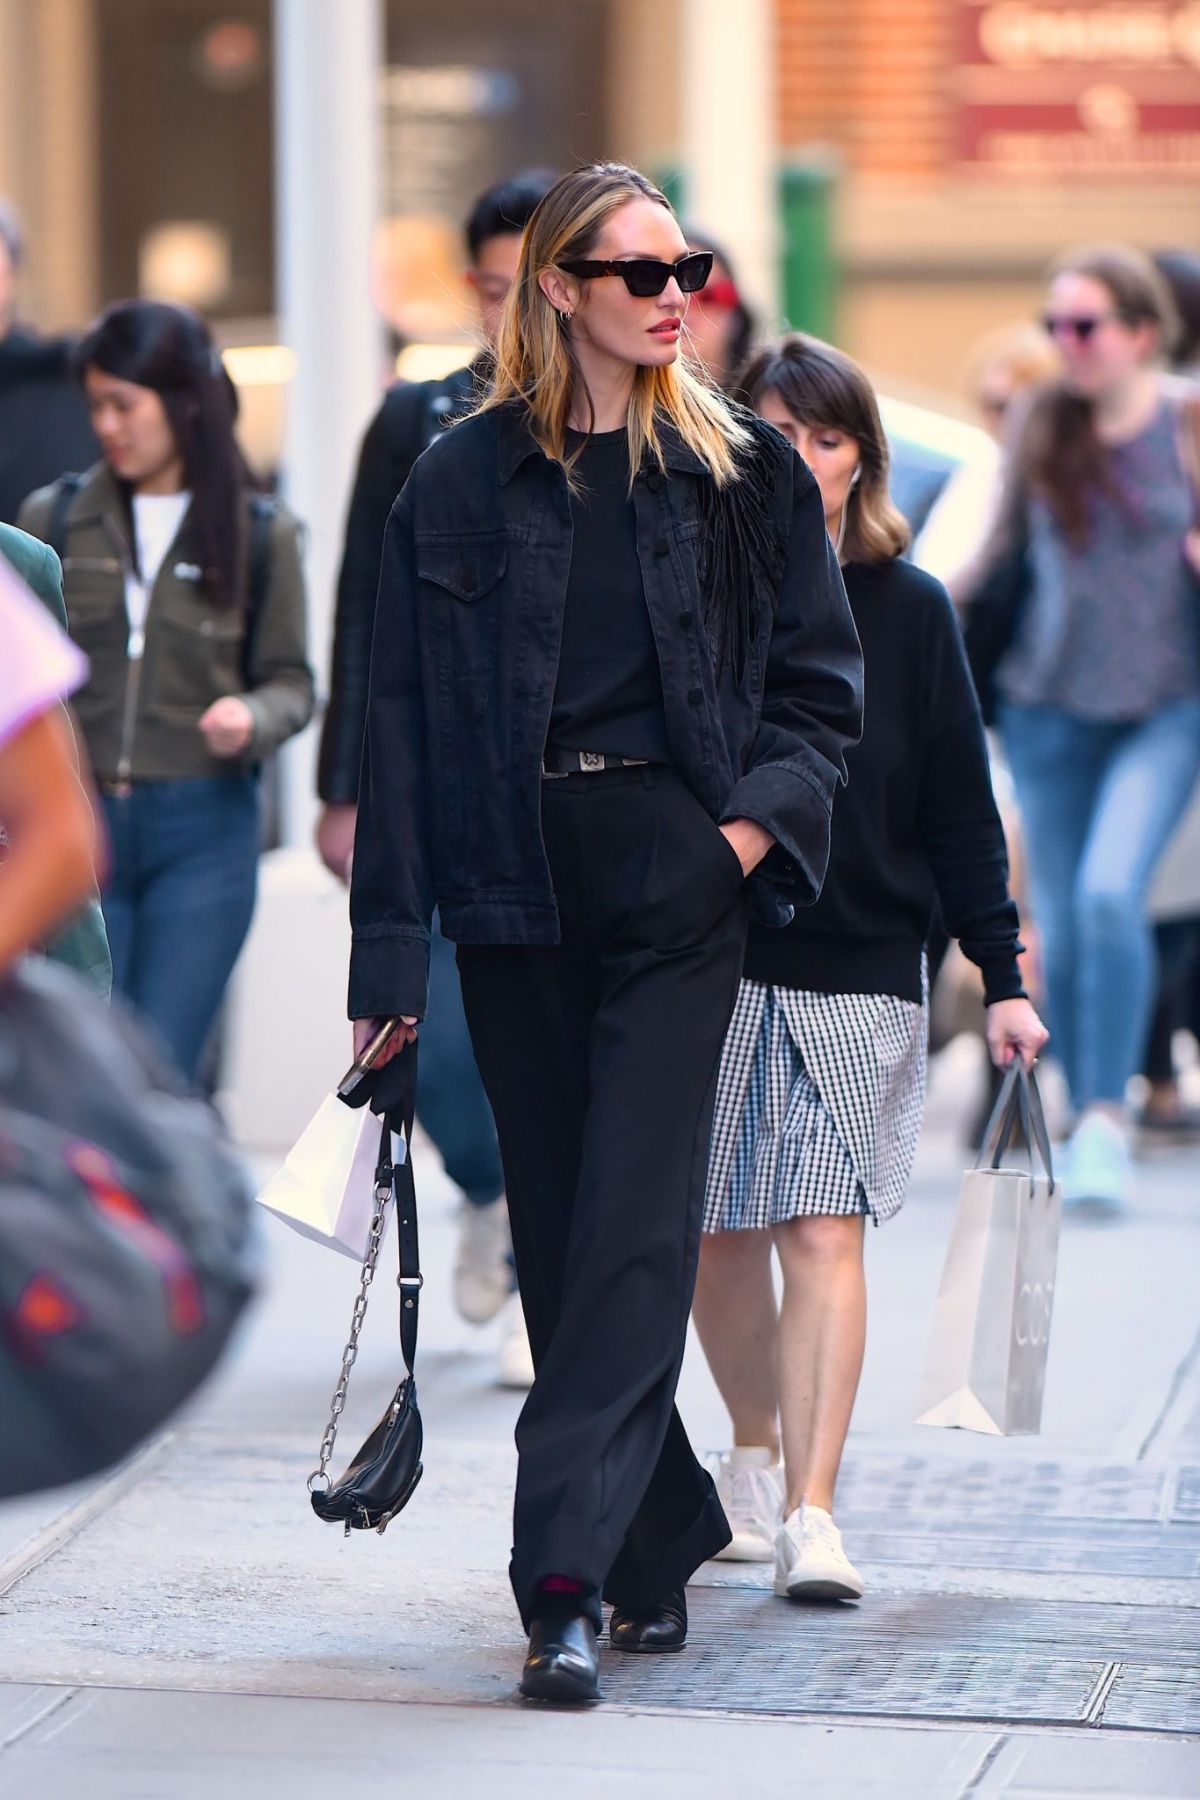 candice-swanepoel-out-and-about-in-new-york-04-24-2019-7.jpg